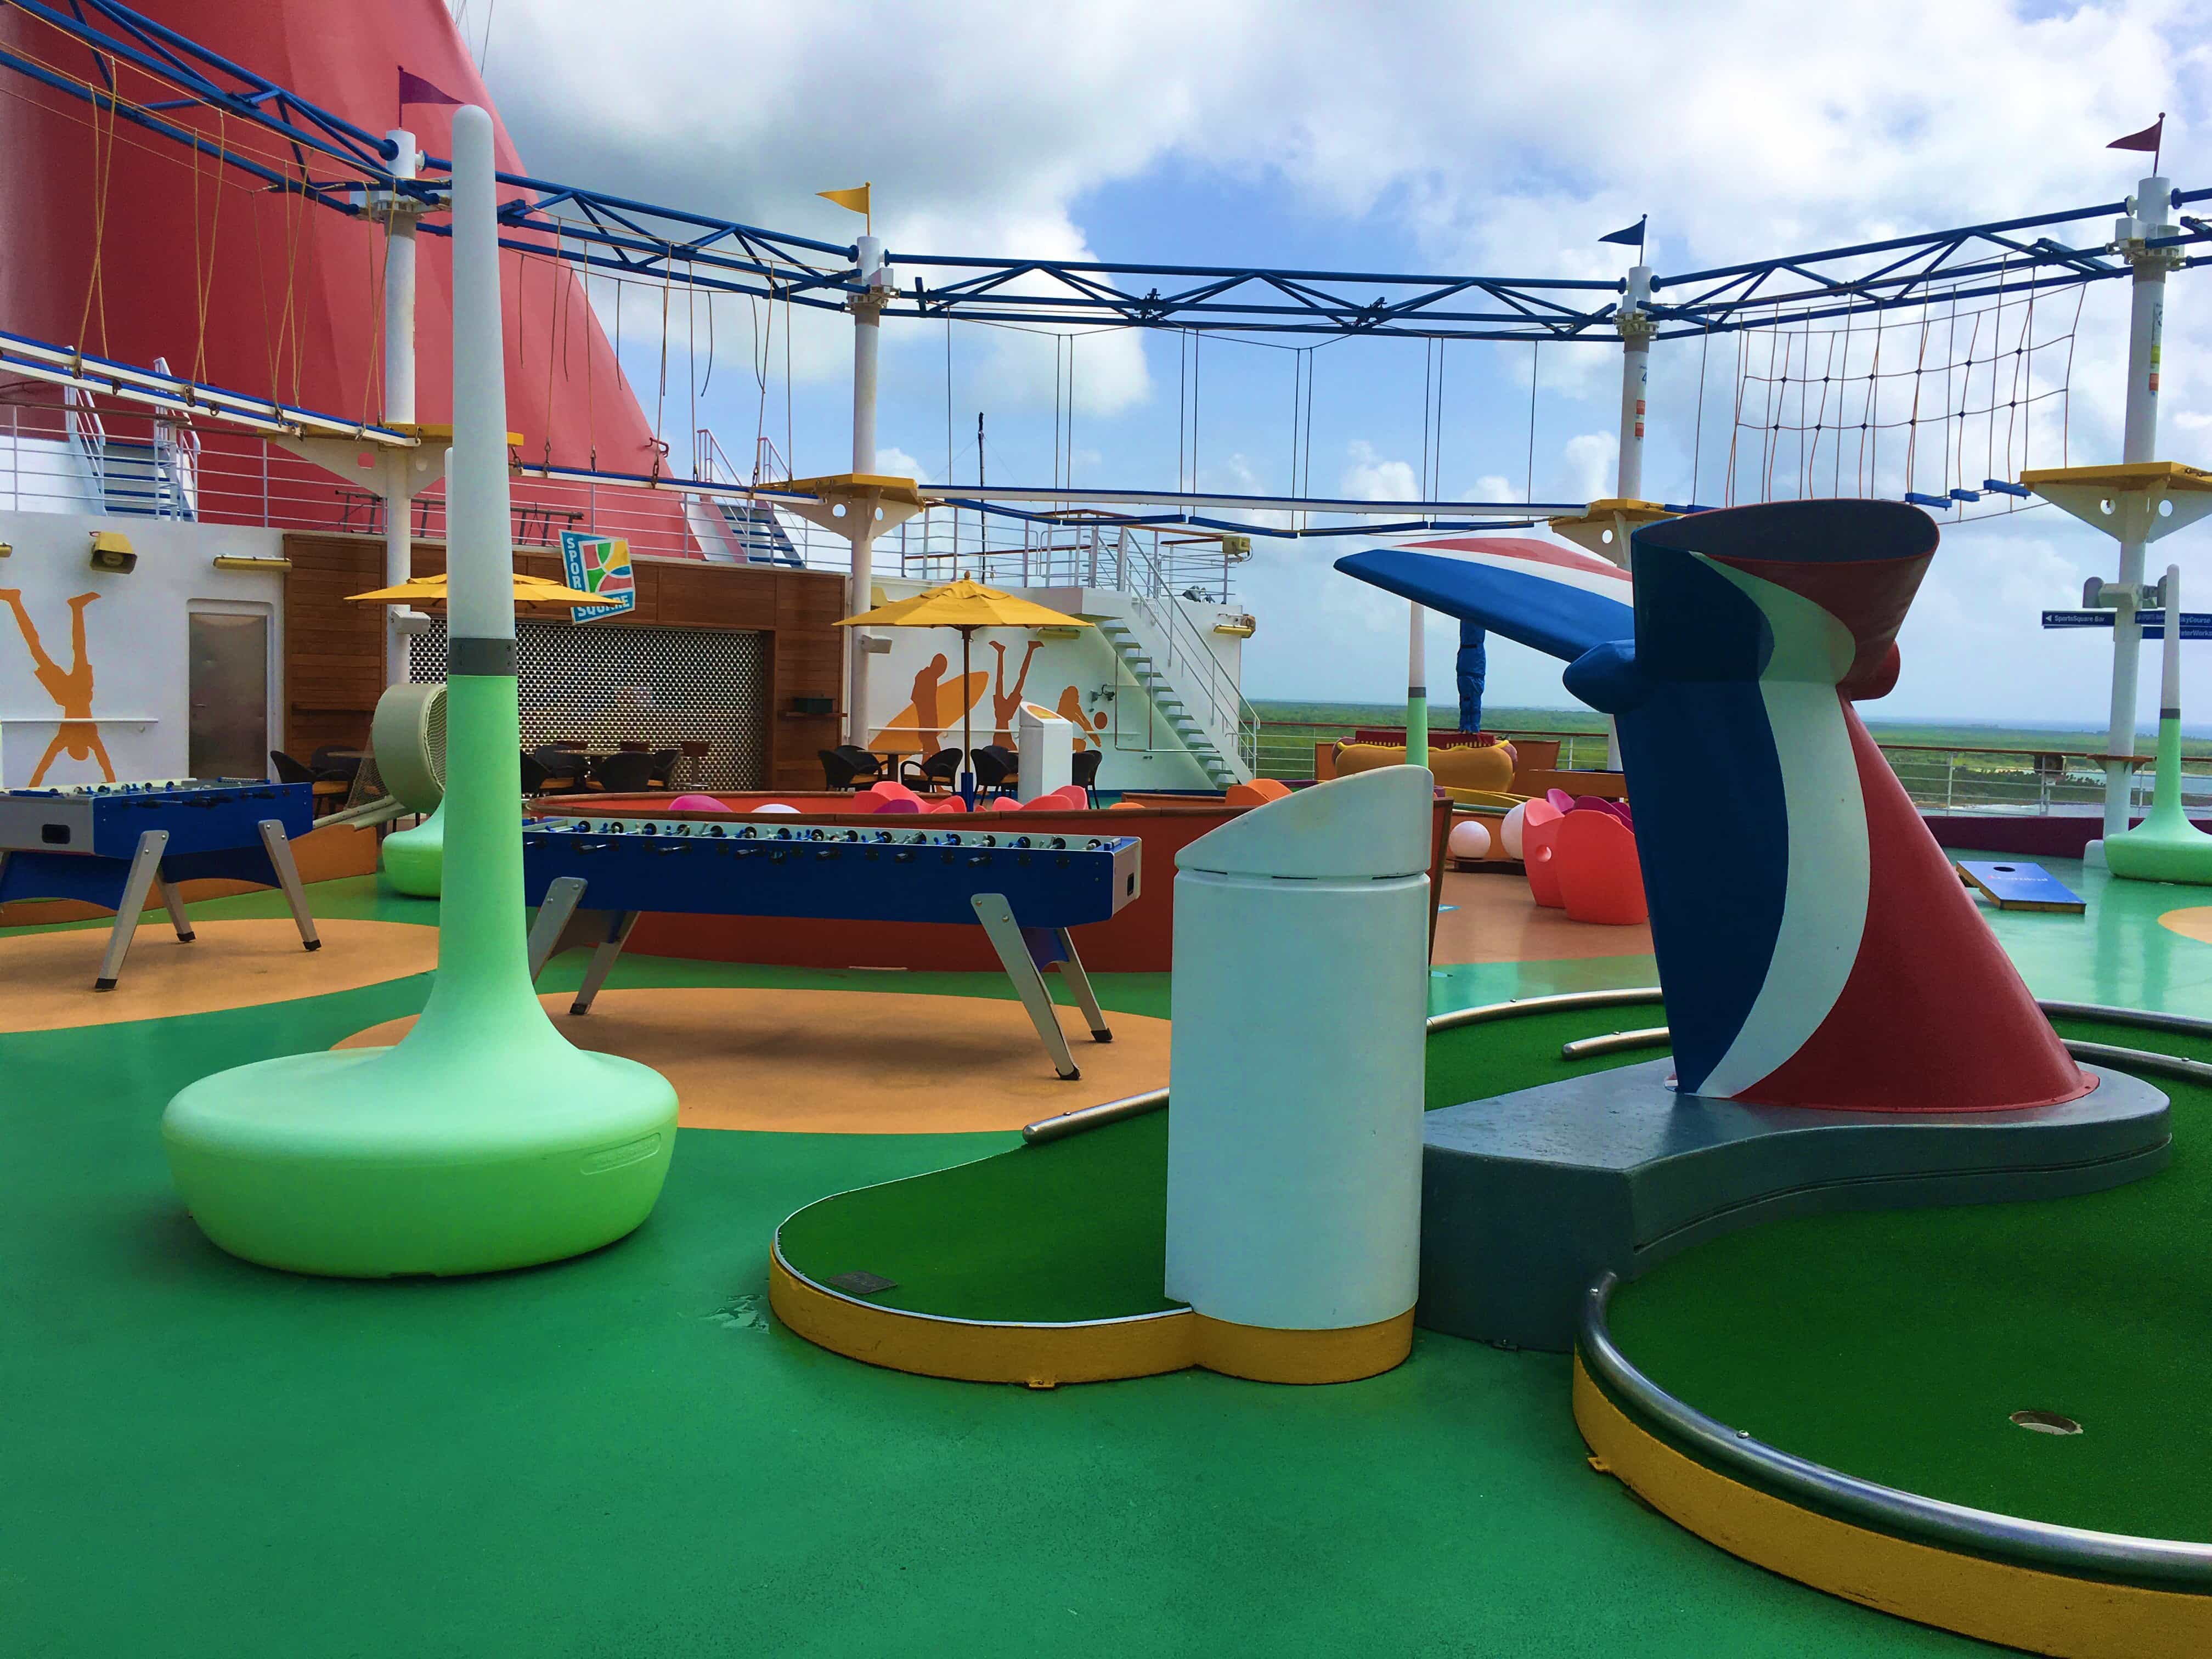 9 Reasons Cruising the Carnival Magic Good for Adults - fun on the sport courts